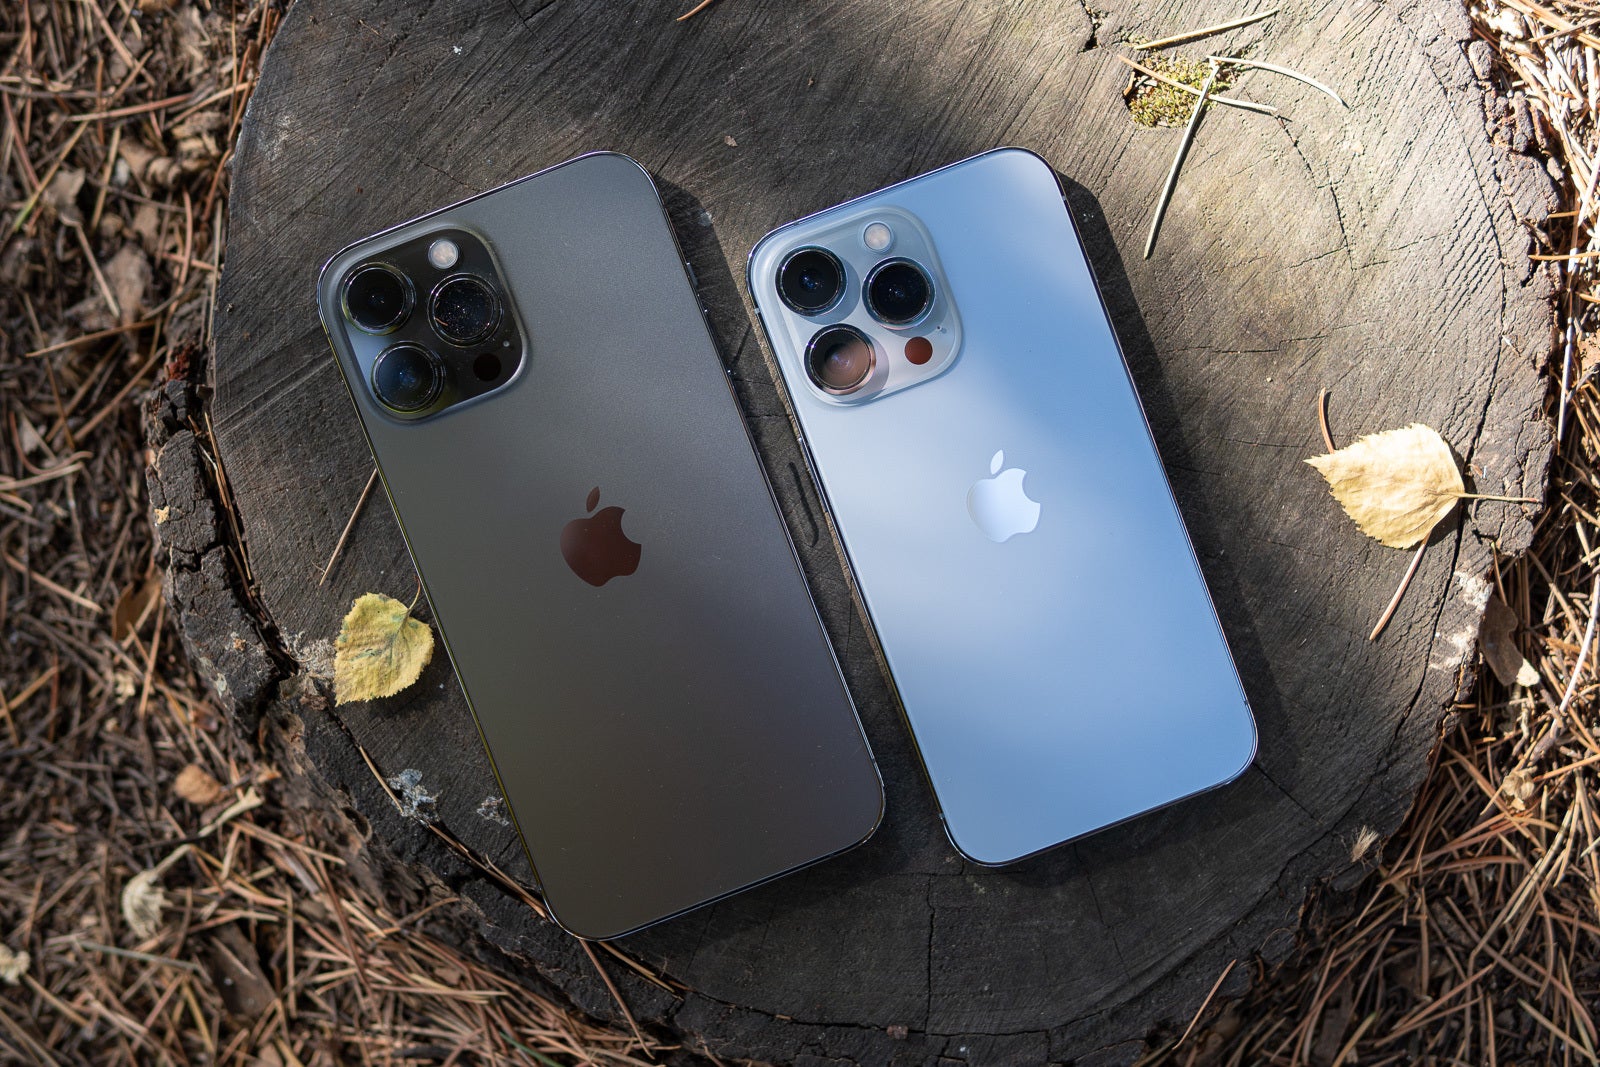 The iPhone 14 might be stuck with Wi-Fi 6 just like the iPhone 13 - Apple&#039;s iPhone 14 and rumored AR headset could both feature Wi-Fi 6e if the company secures enough components